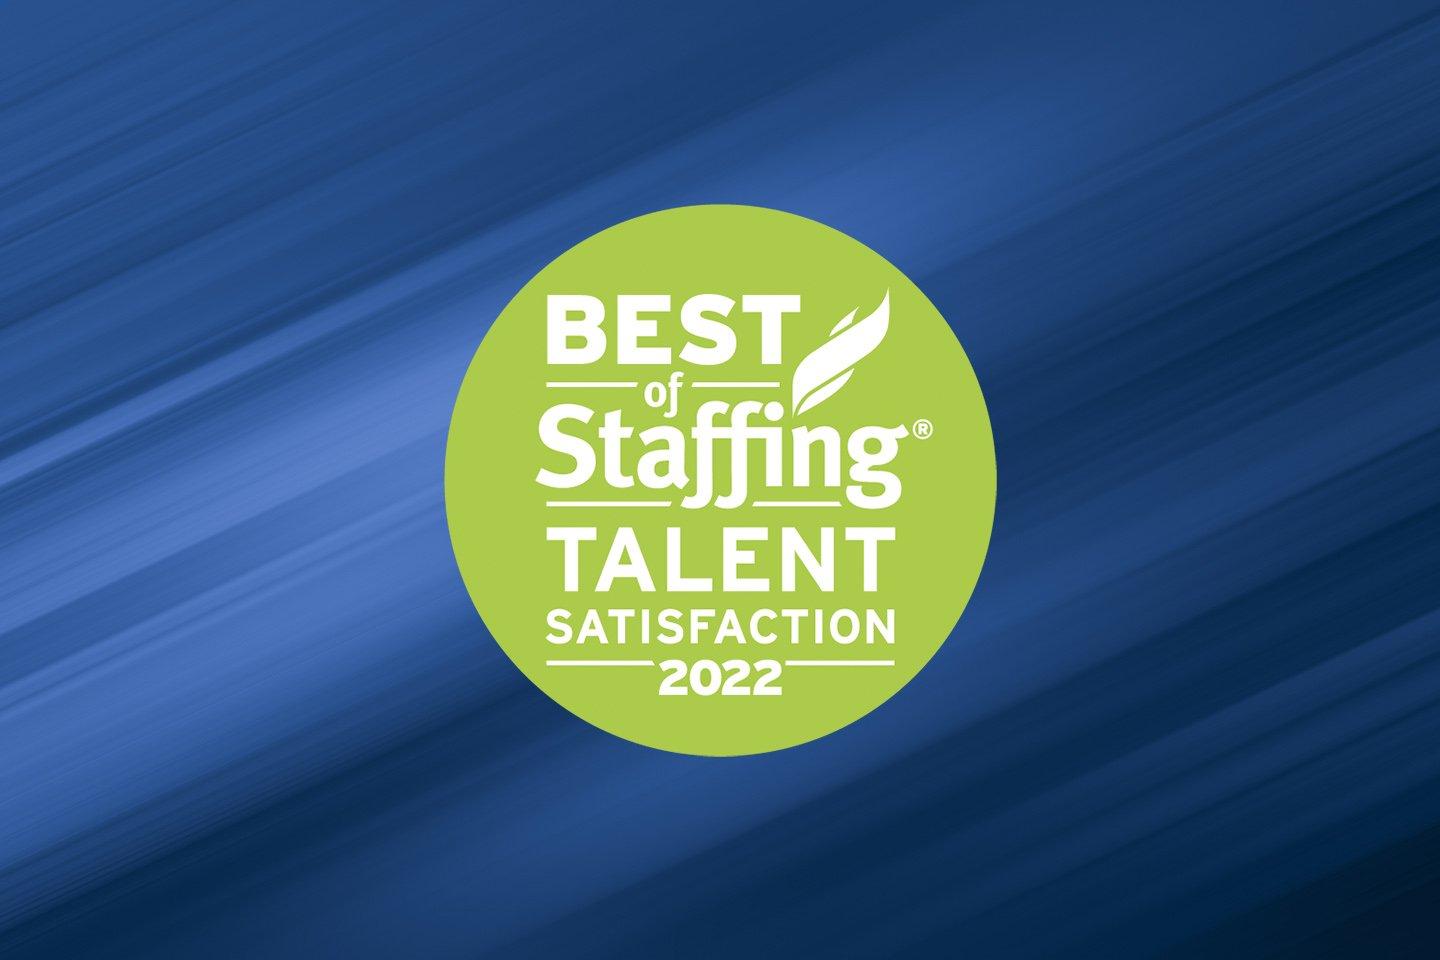 Cross Country Education Wins ClearlyRated’s 2022 Best of Staffing Award for Service Excellence